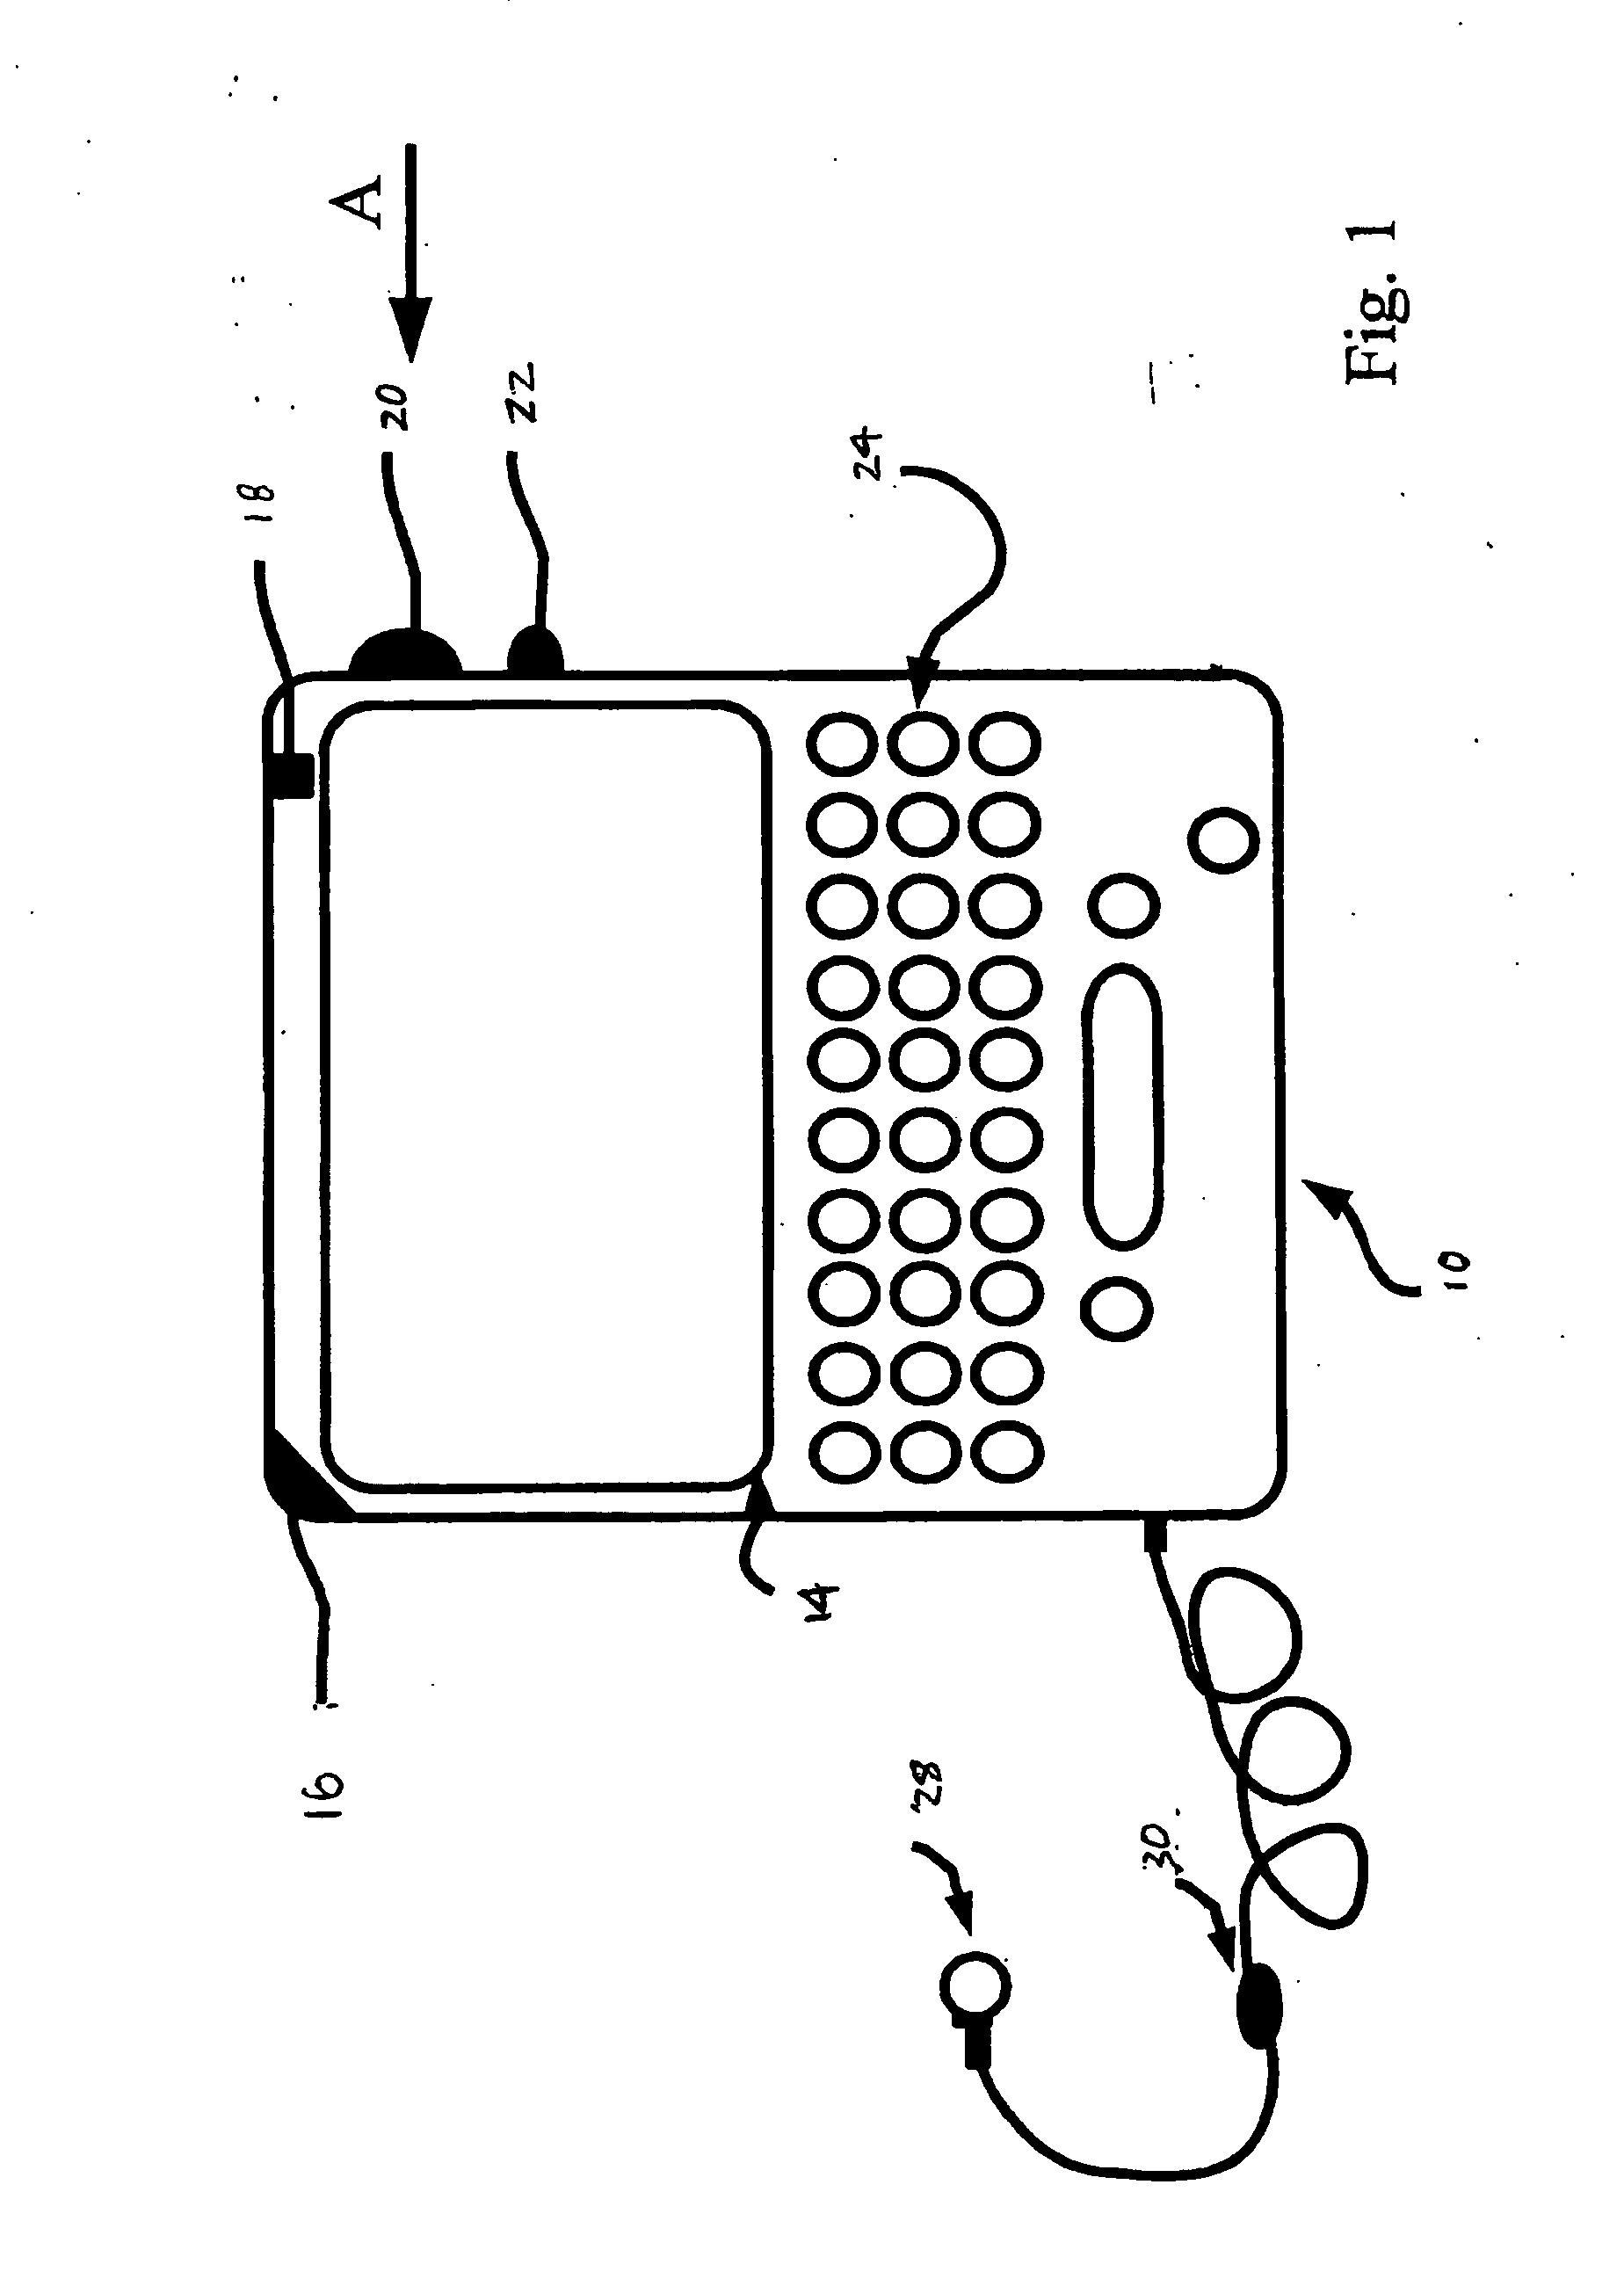 System and method for automatically responding to a received communication